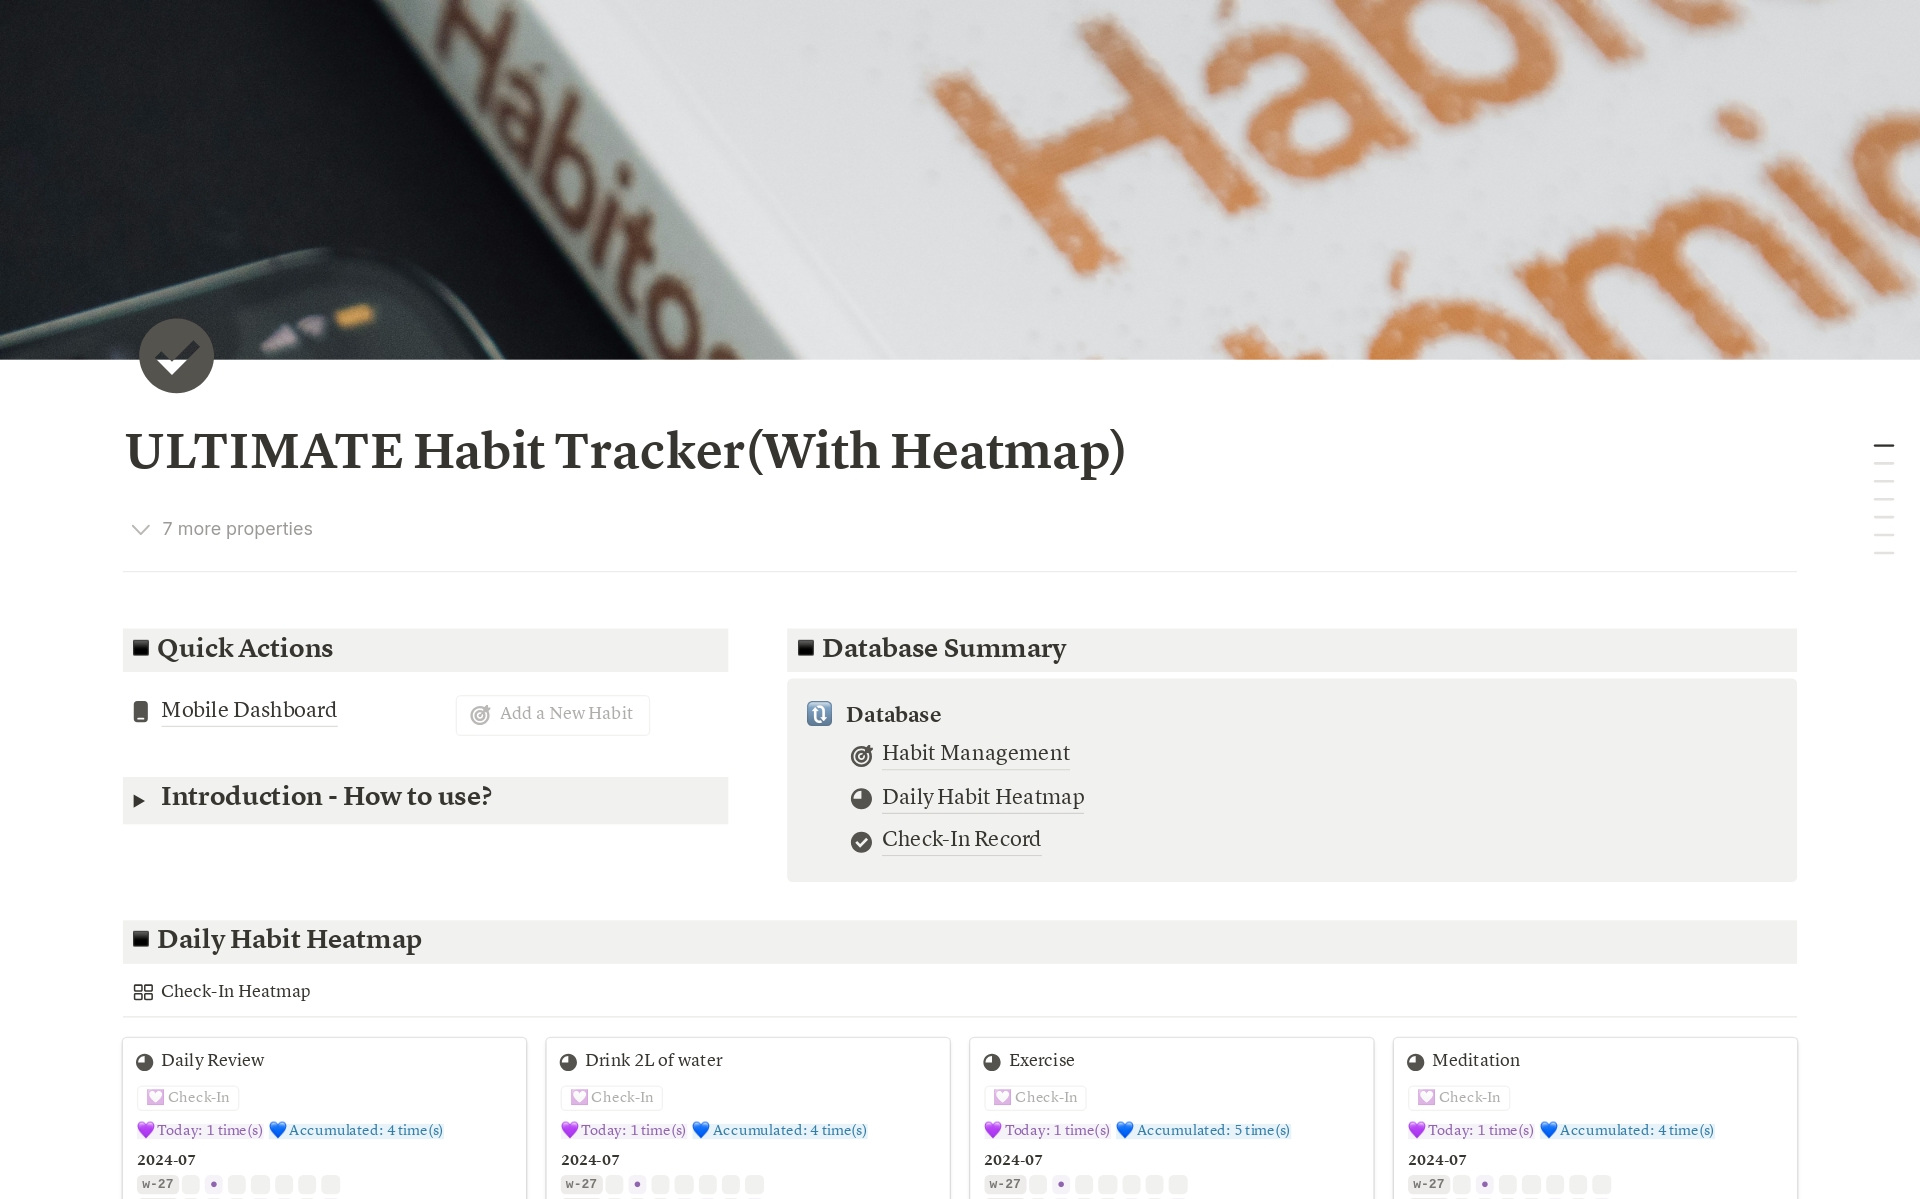 This template is designed to help you track and manage daily habits effectively. It includes features for habit management, daily check-in records, and a check-in heatmap, allowing you to monitor your daily habit execution comprehensively.